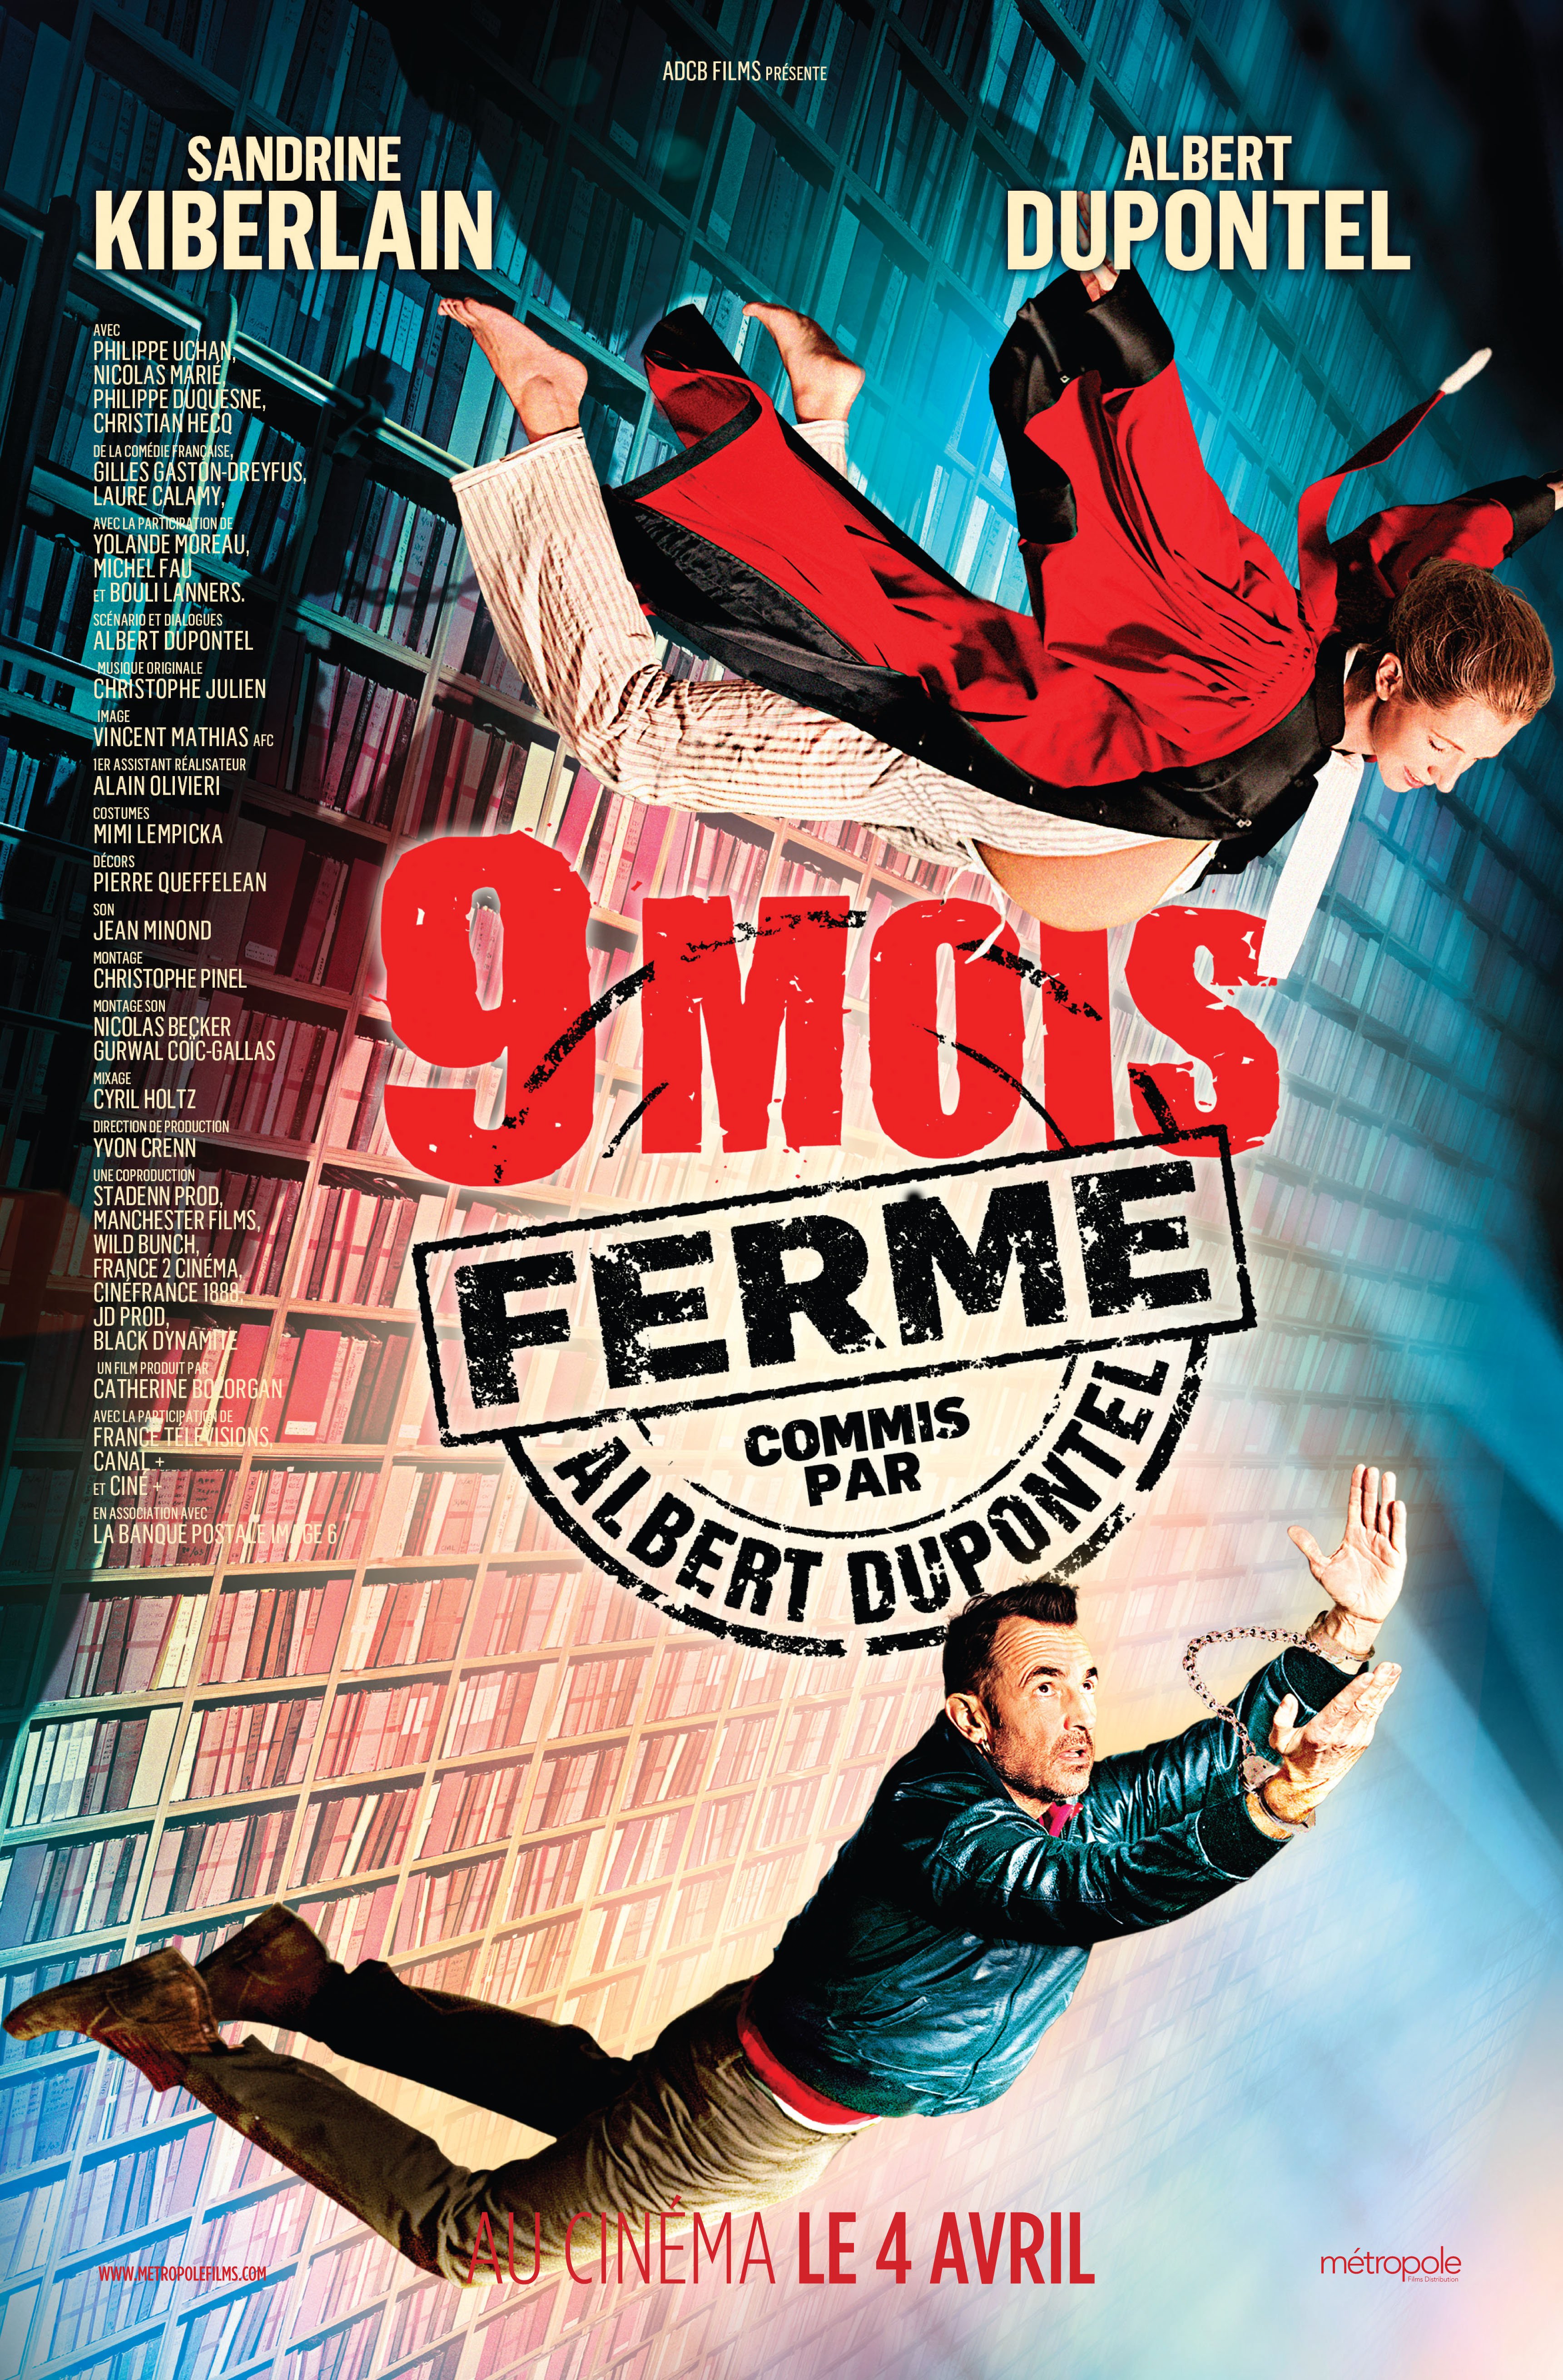 Poster of the movie 9 mois ferme